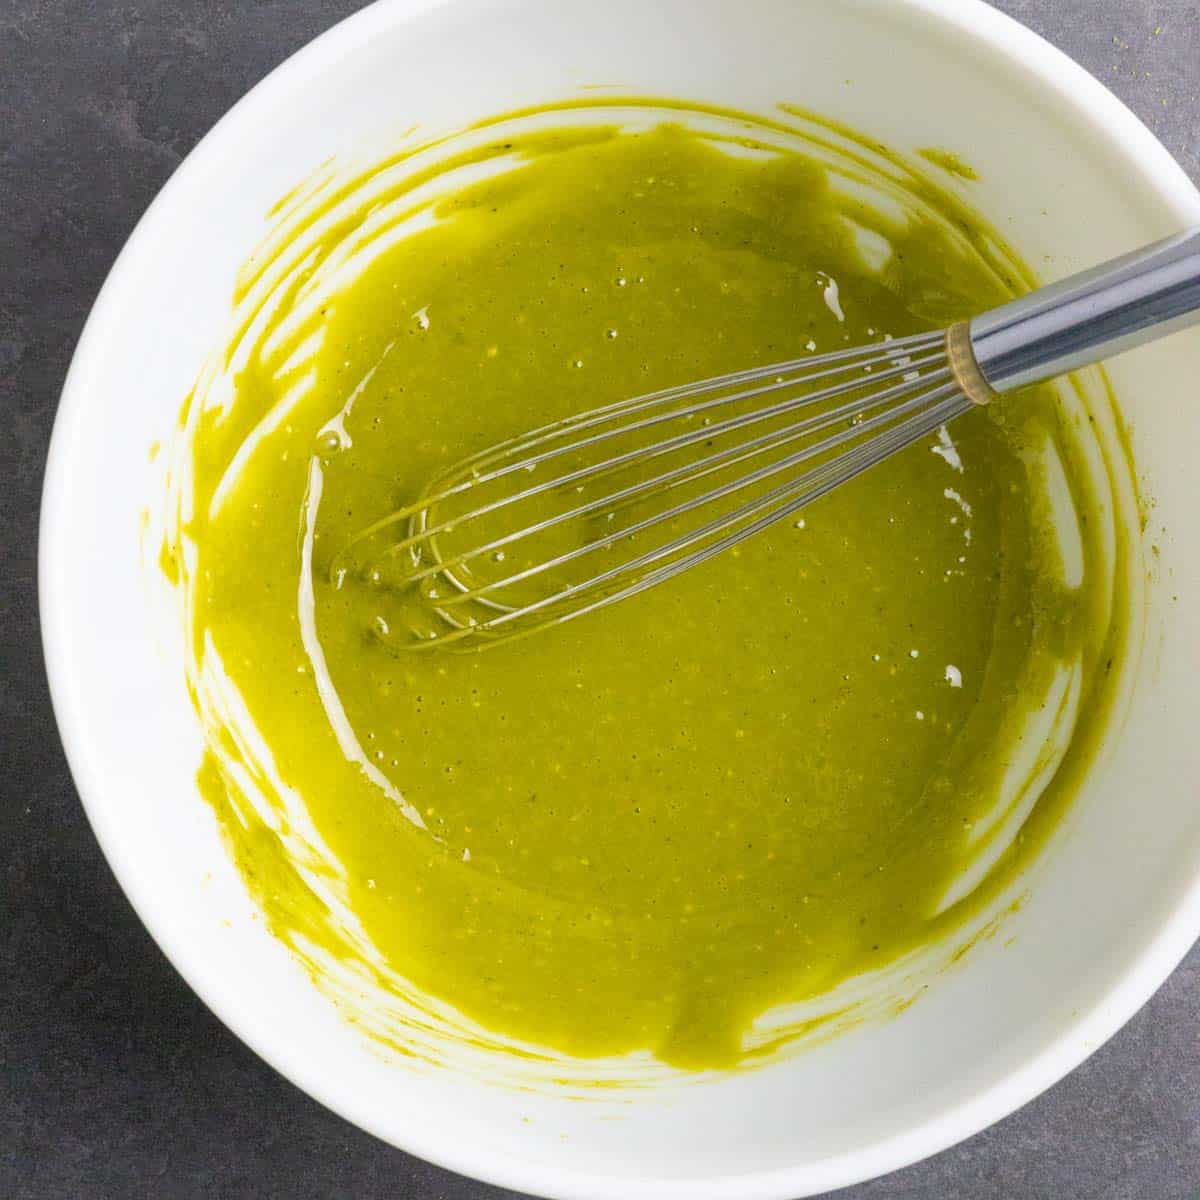 Egg, sweetener, and matcha mixed together in a white mixing bowl with a metal whisk in the bowl.